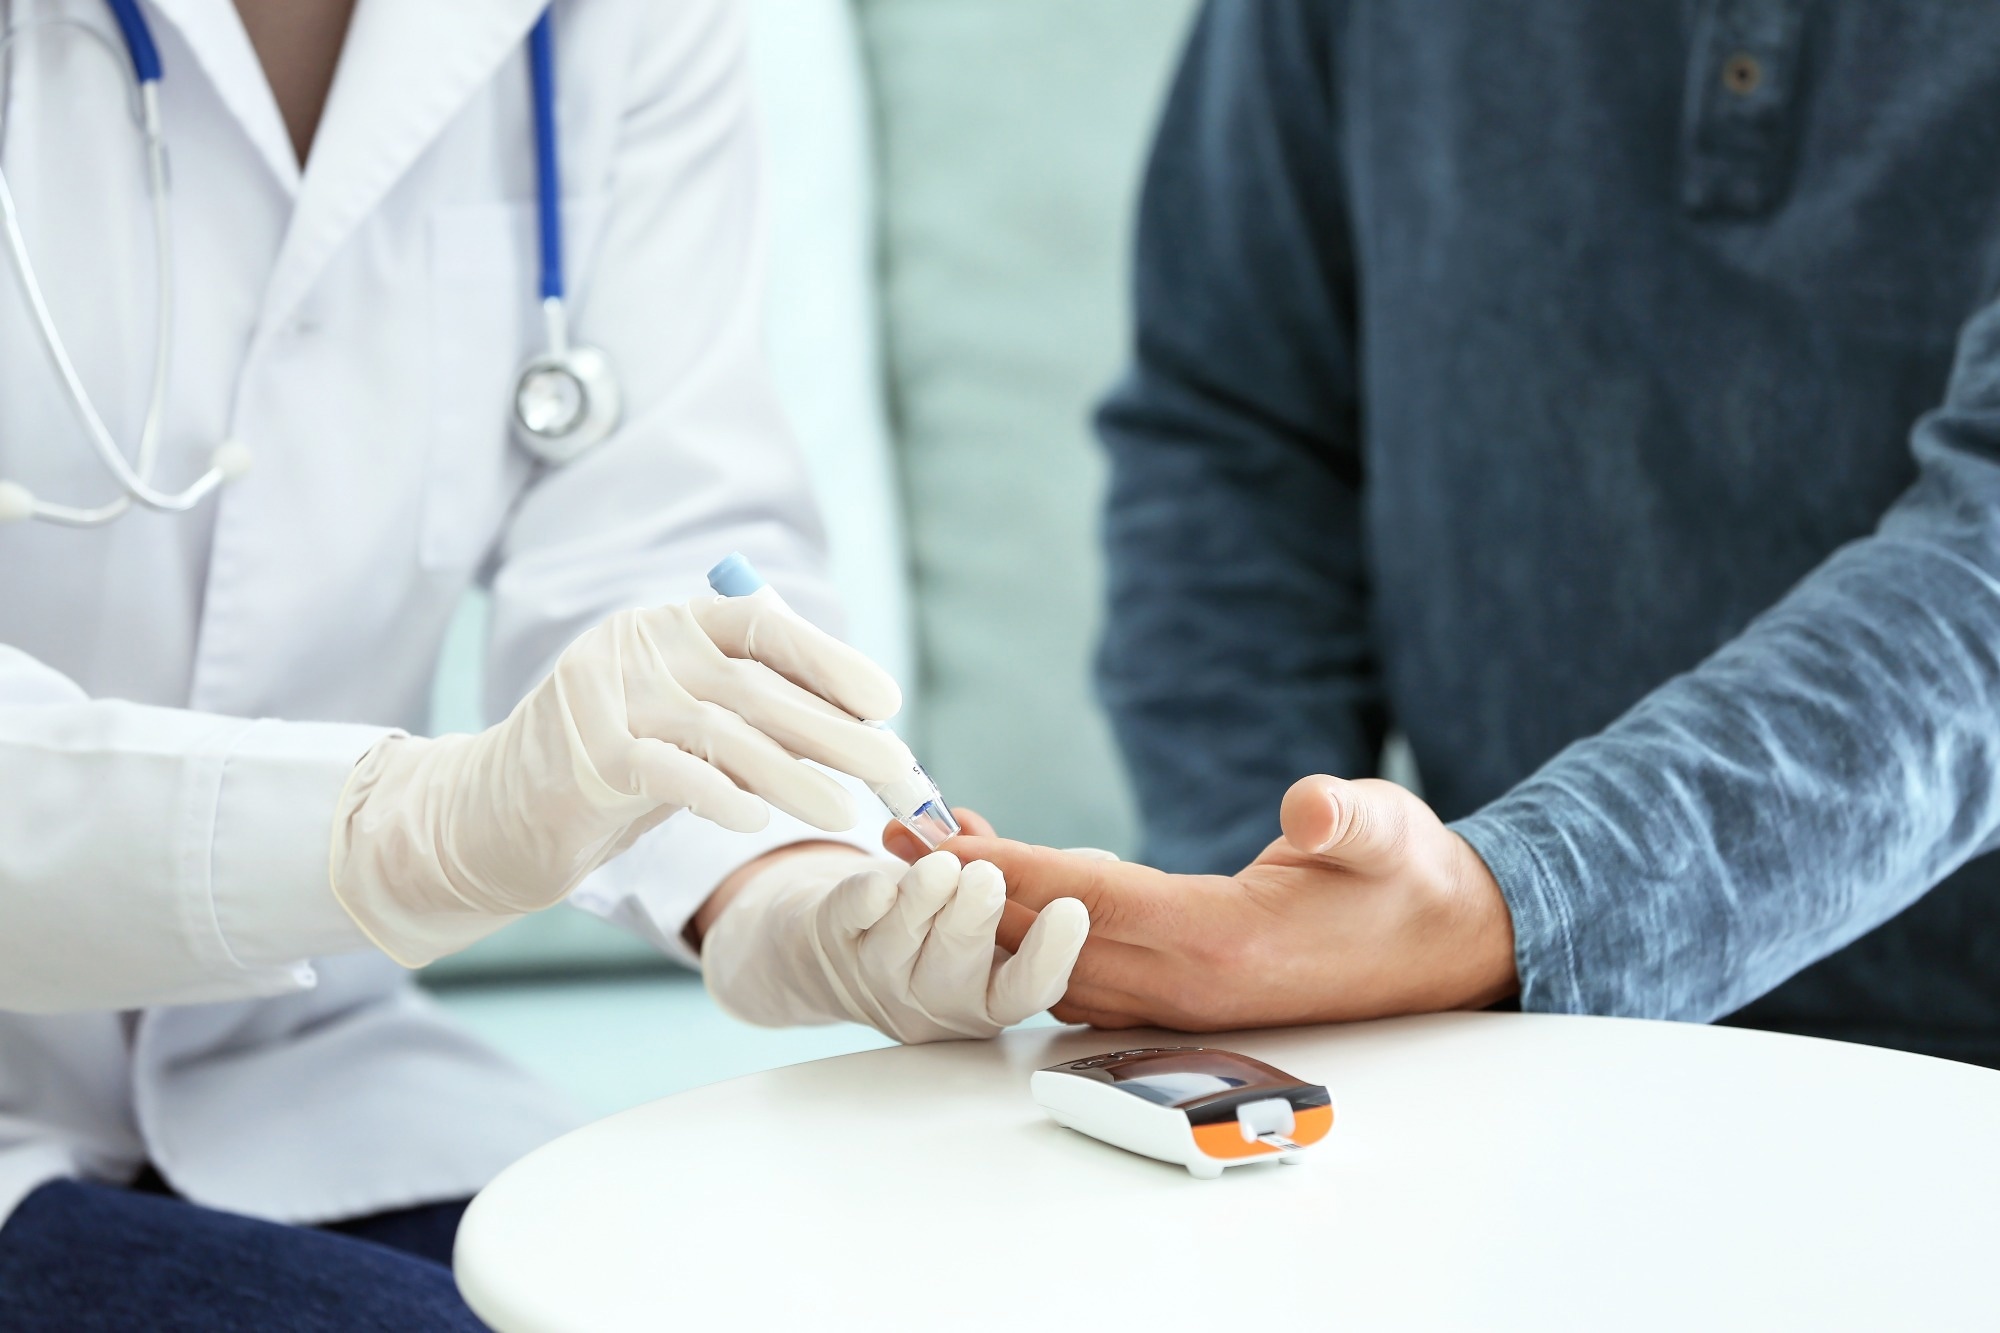 Study: Are fewer cases of diabetes mellitus diagnosed in the months after SARS-CoV-2 infection? Image Credit: Africa Studio/Shutterstock